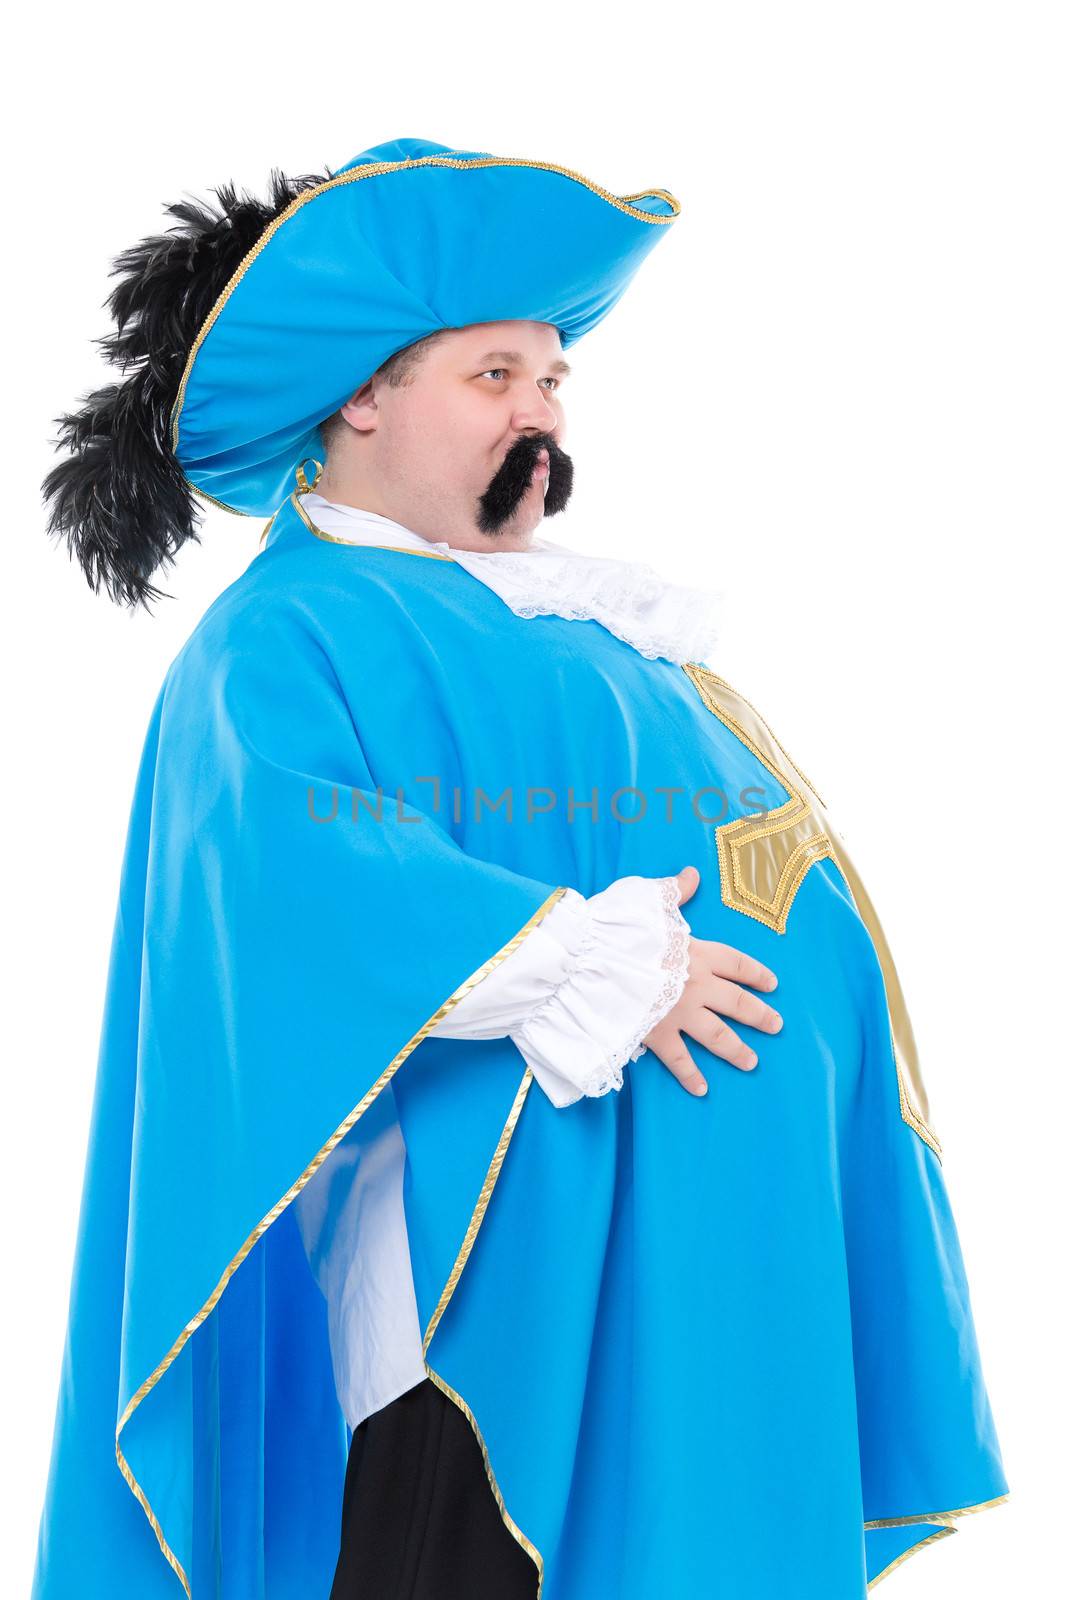 Cavalier gentleman in feathered cap and turquoise blue uniform of the cross, with over a rotund fat belly, isolated on white